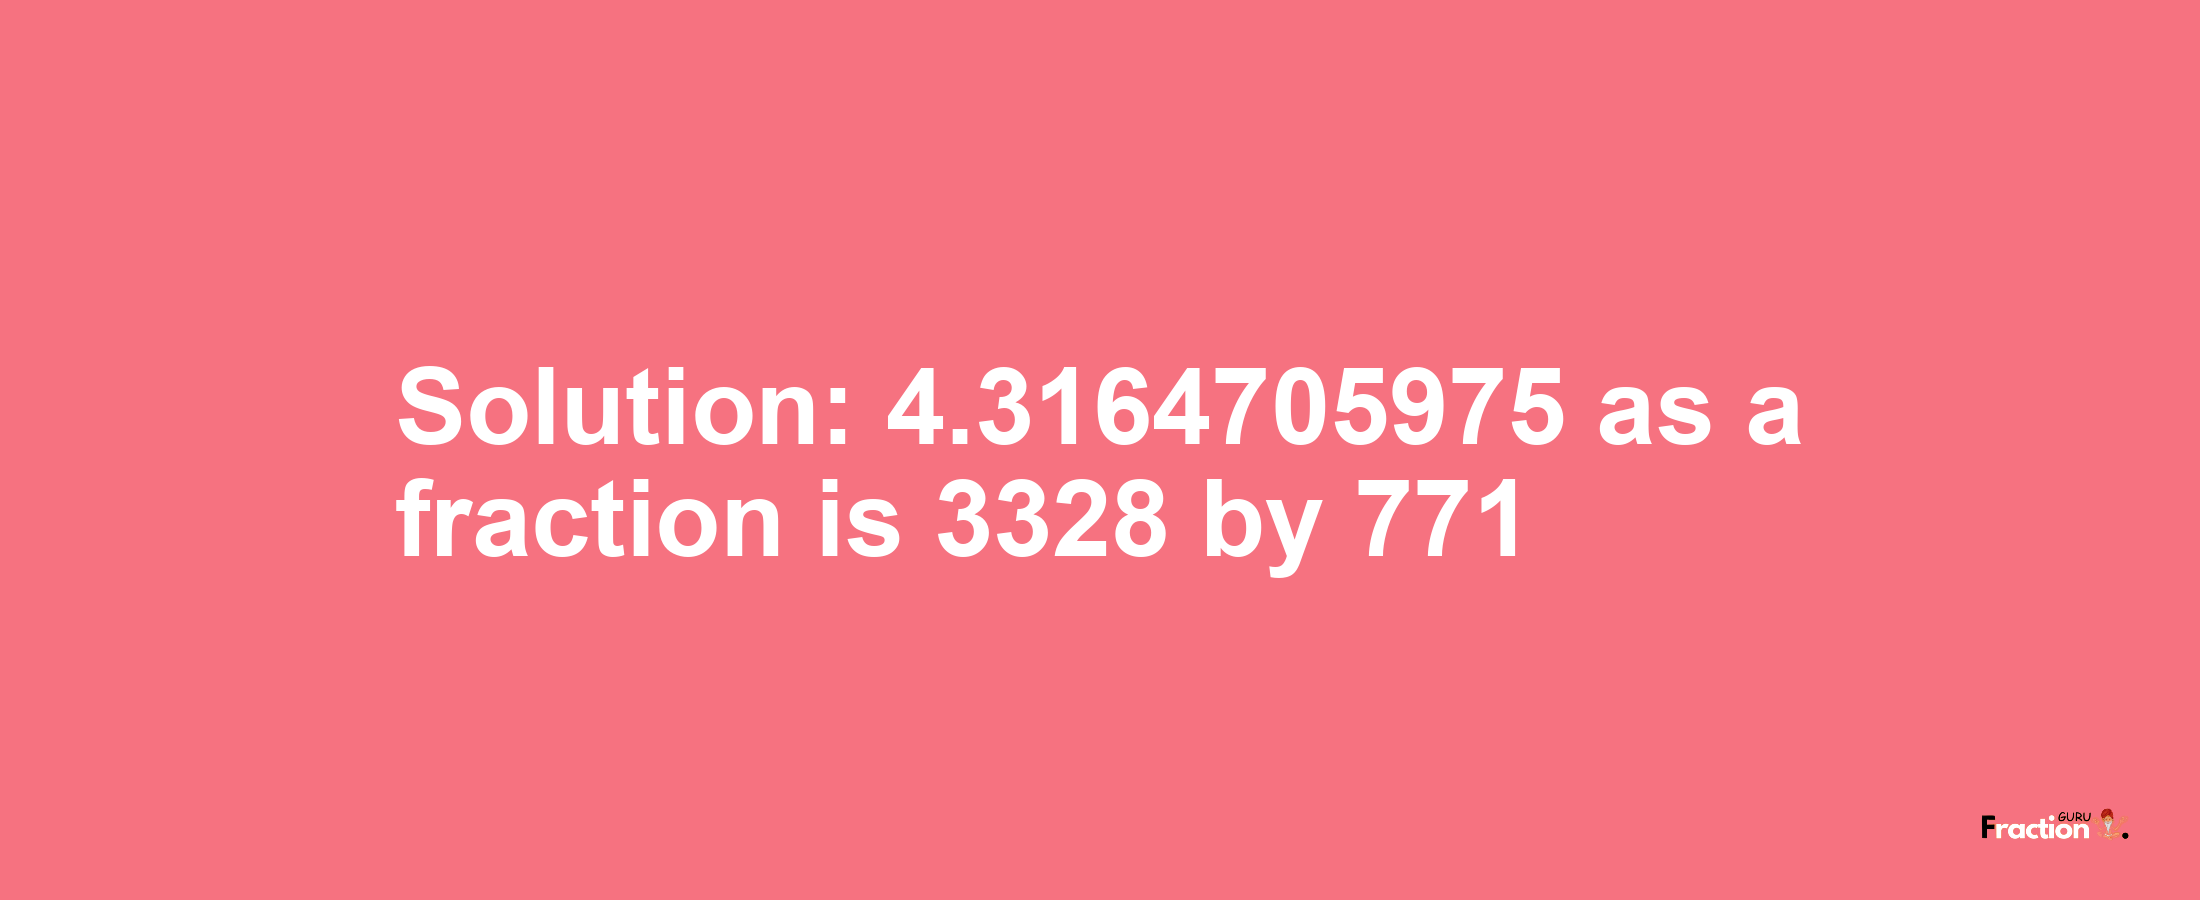 Solution:4.3164705975 as a fraction is 3328/771